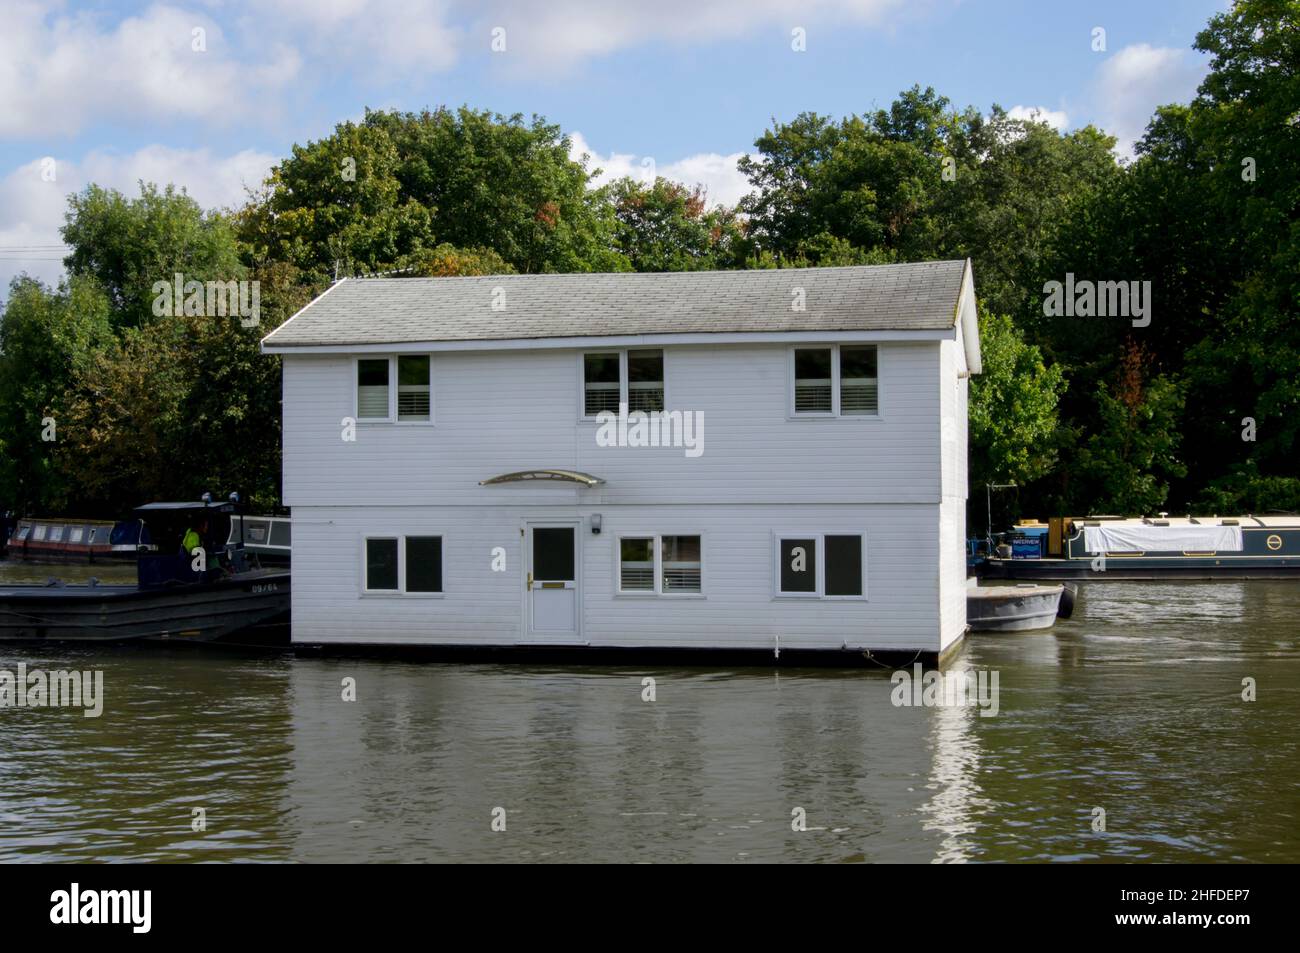 Houseboat is towed on River Thames Stock Photo